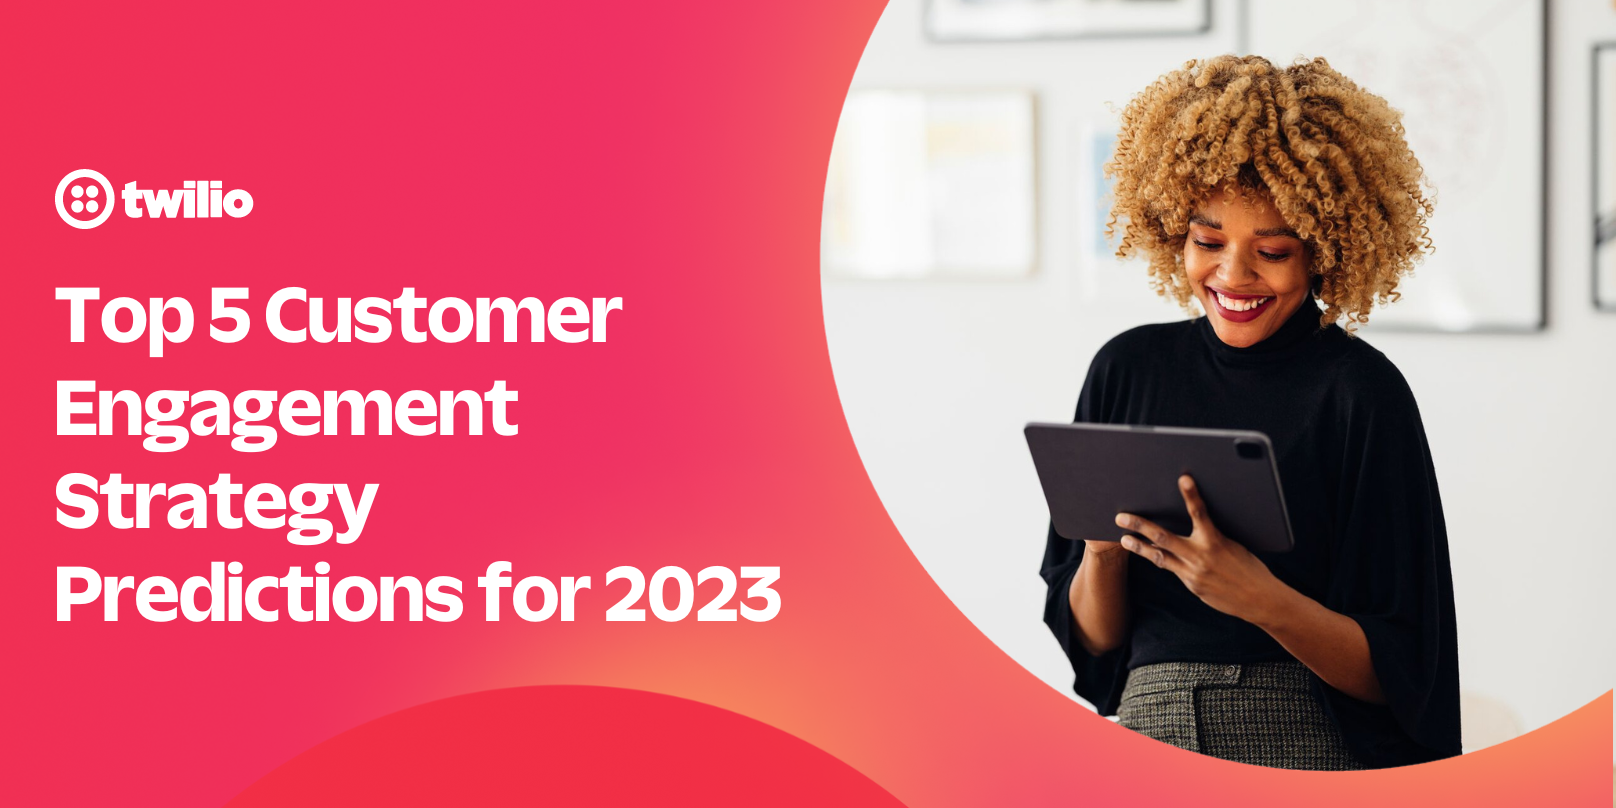 Top 5 Customer Engagement Strategy Predictions for 2023